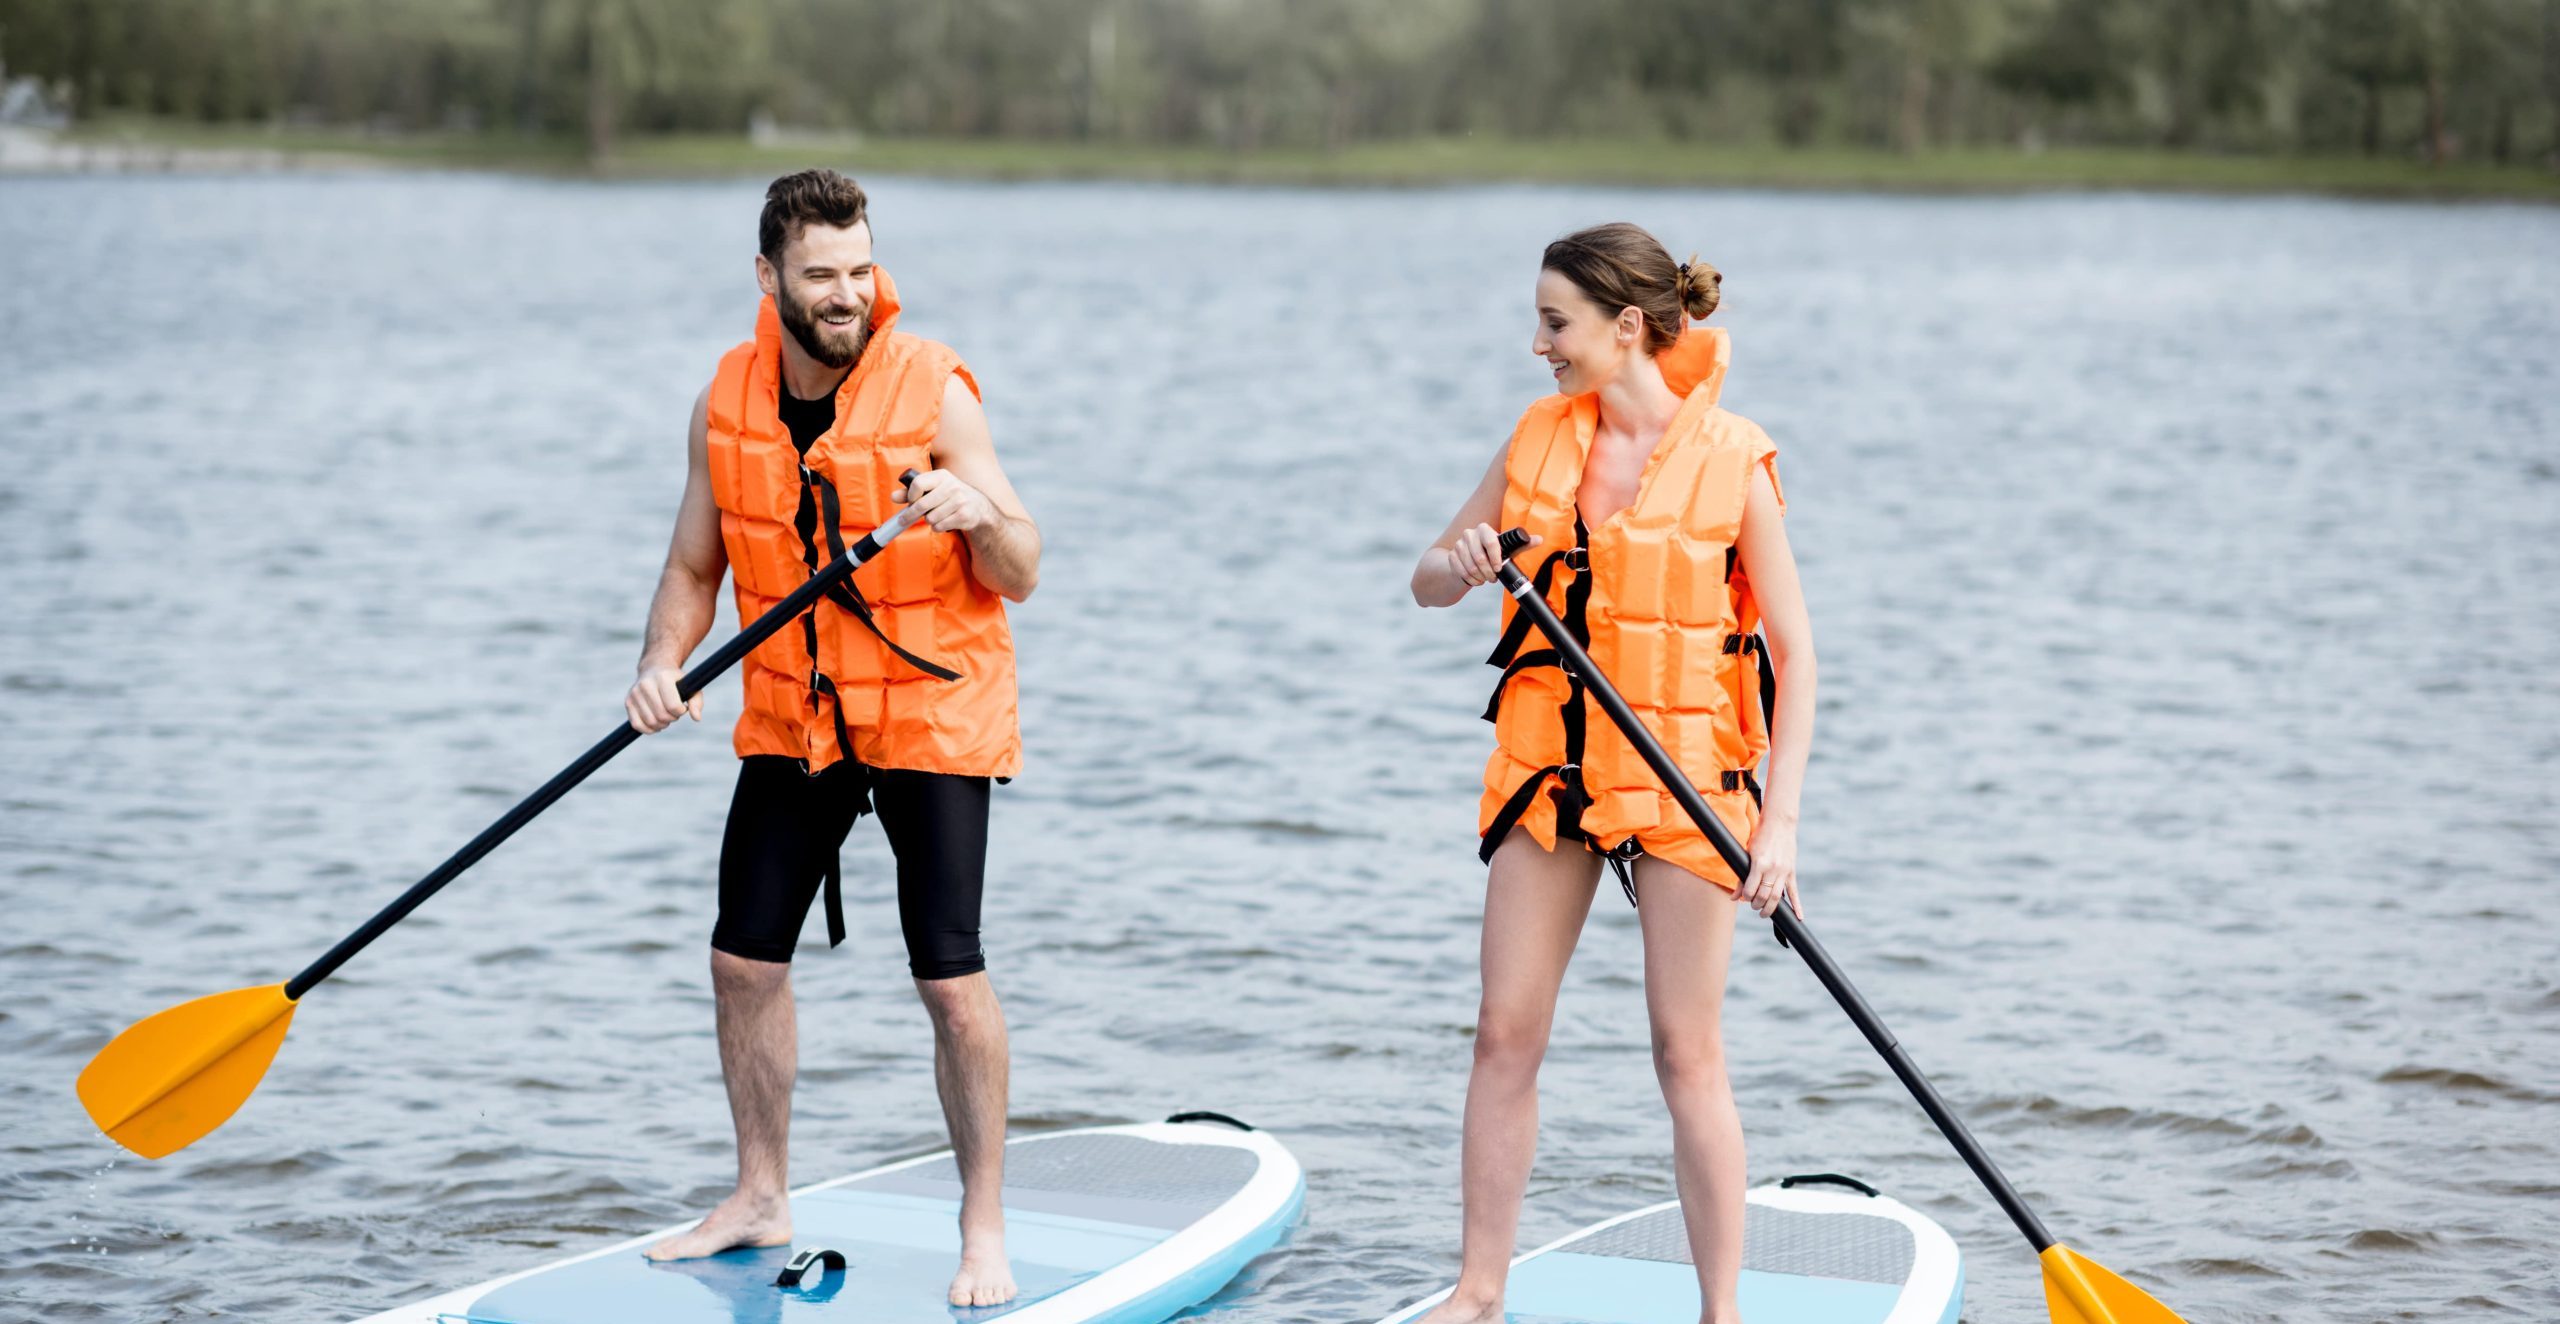 Beat the heat: Paddleboarding & 4 other cool water sports and activities to try this summer